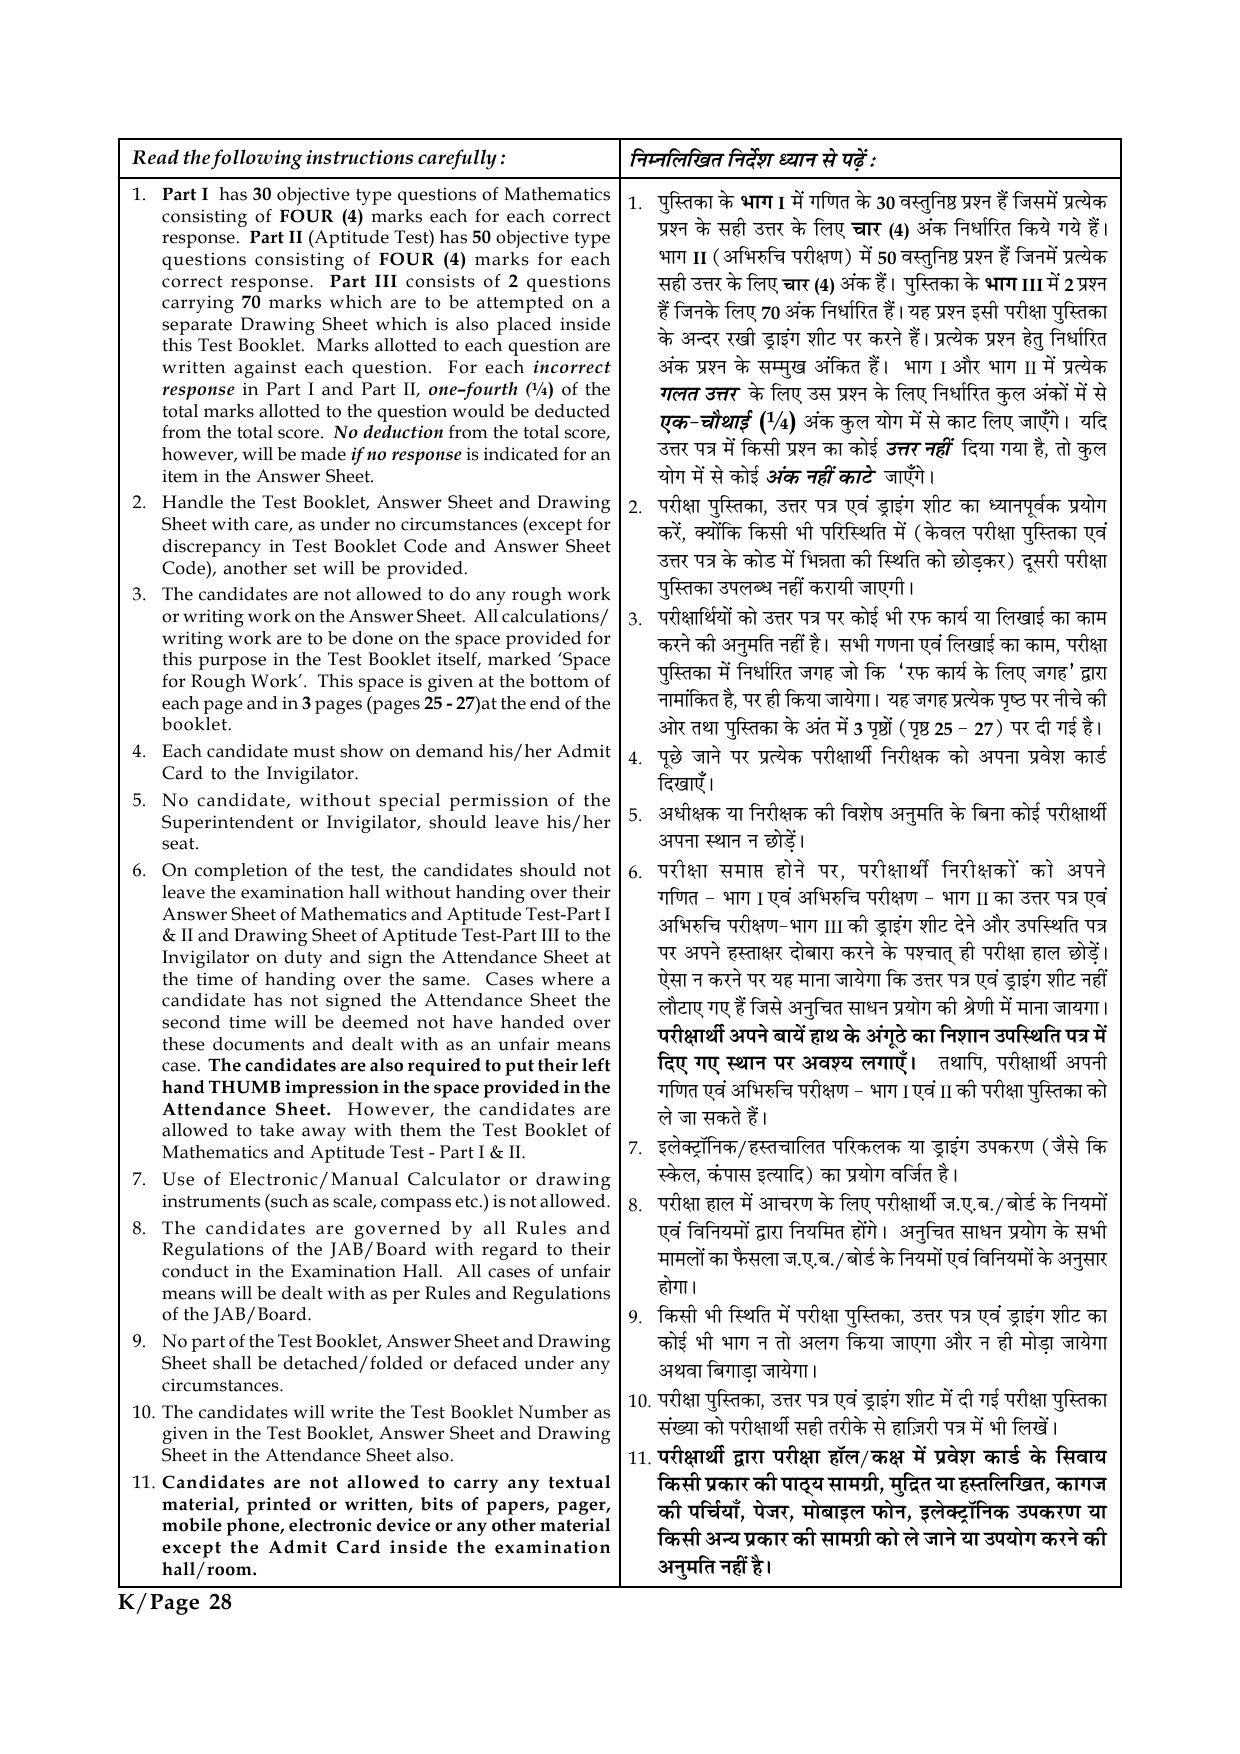 JEE Main Exam Question Paper 2015 Booklet K 25